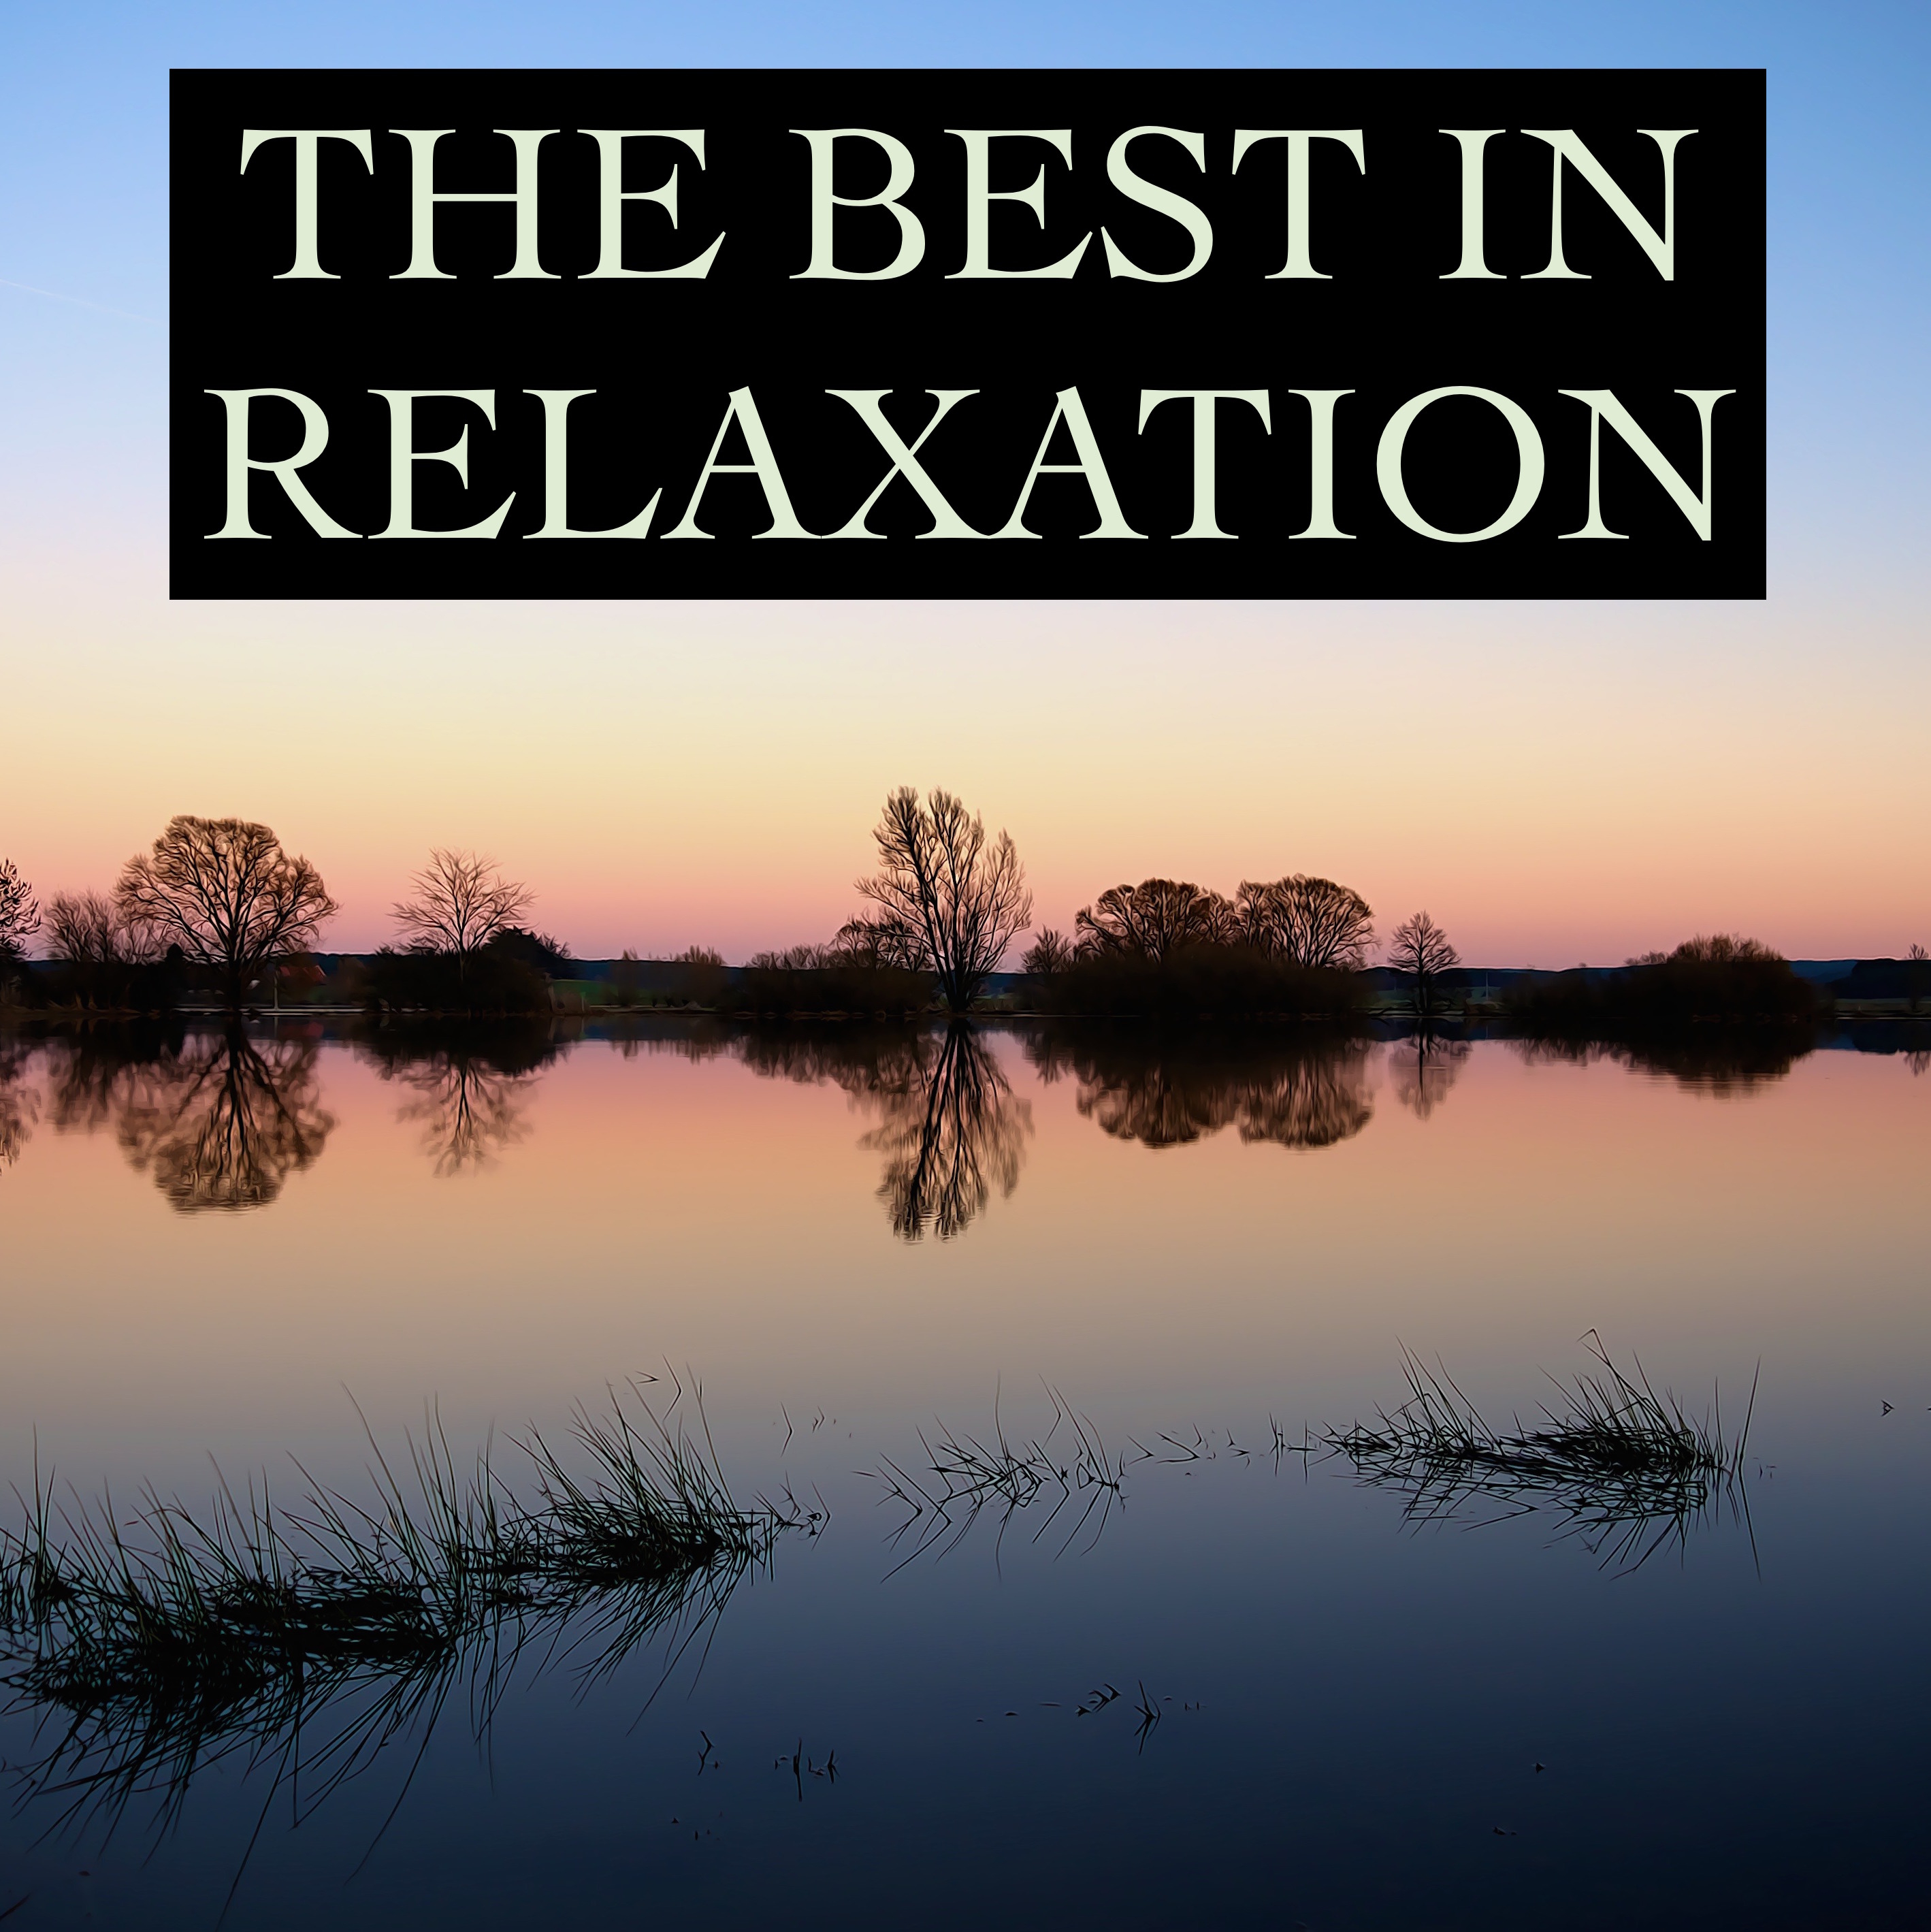 The Best in Relaxation - Timeless Nature & Water Melodies for Ultimate Stress Relief, Mindfulness, Deep Sleep, Study Concentration, Yoga, Meditation Focus and Better Mental Health